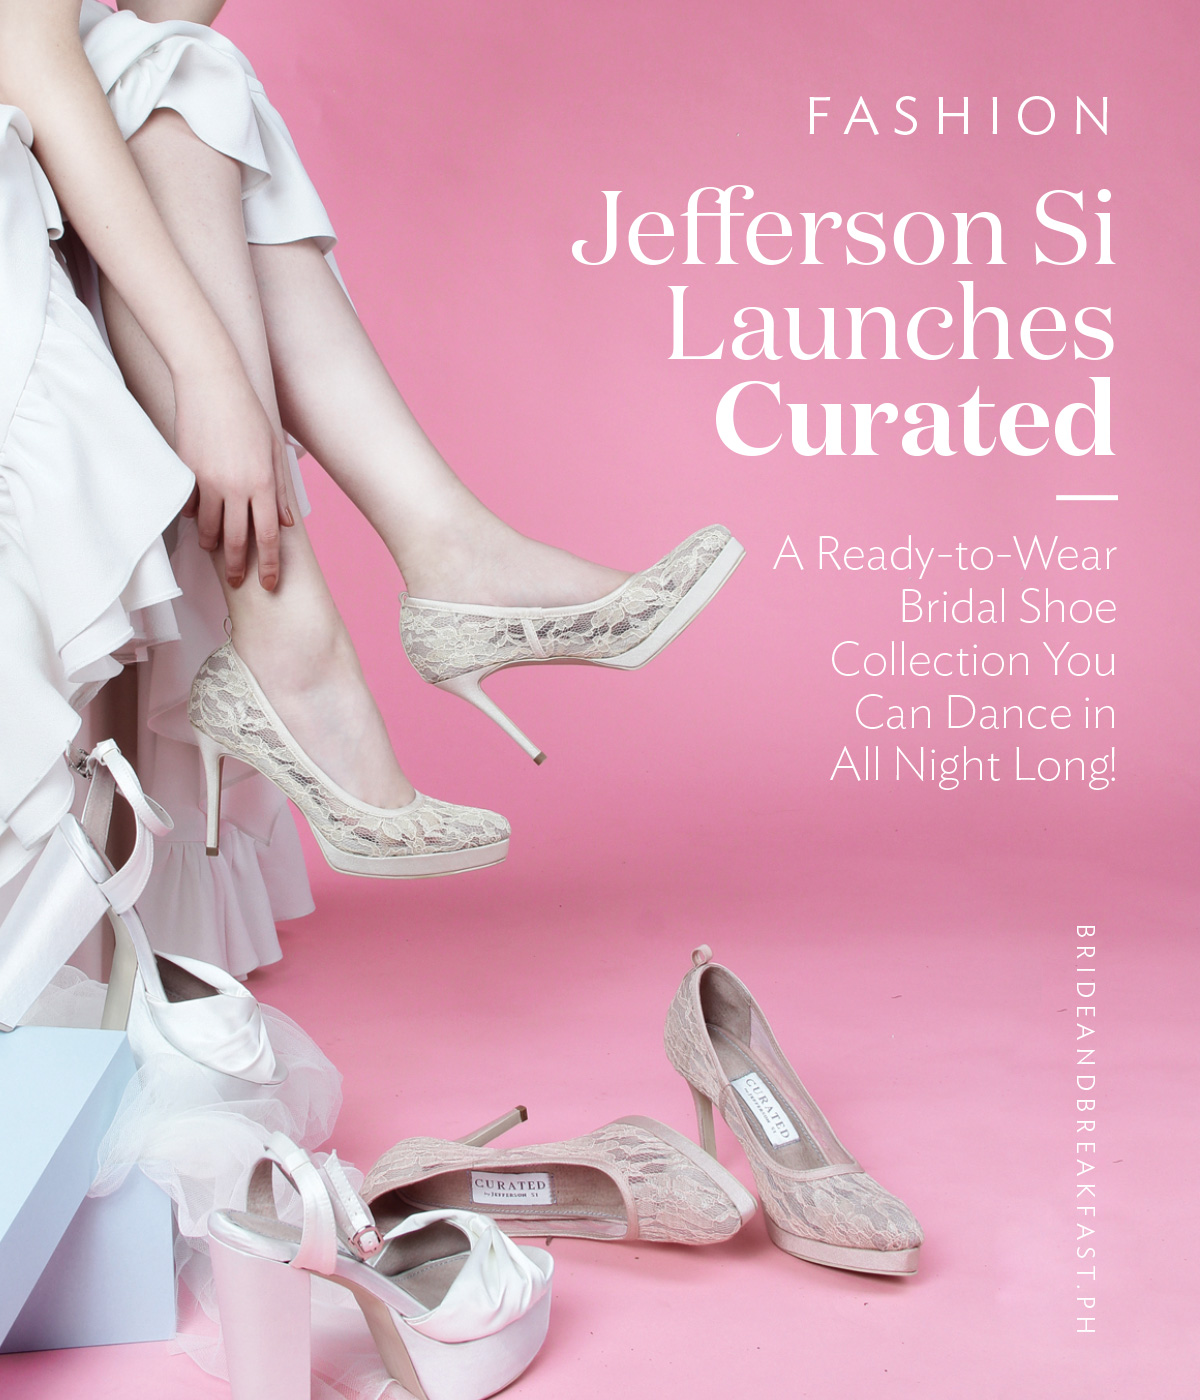 Jefferson Si Launches “Curated”—His First Ready-to-Wear Bridal Shoe Collection You Can Dance in All Night Long!